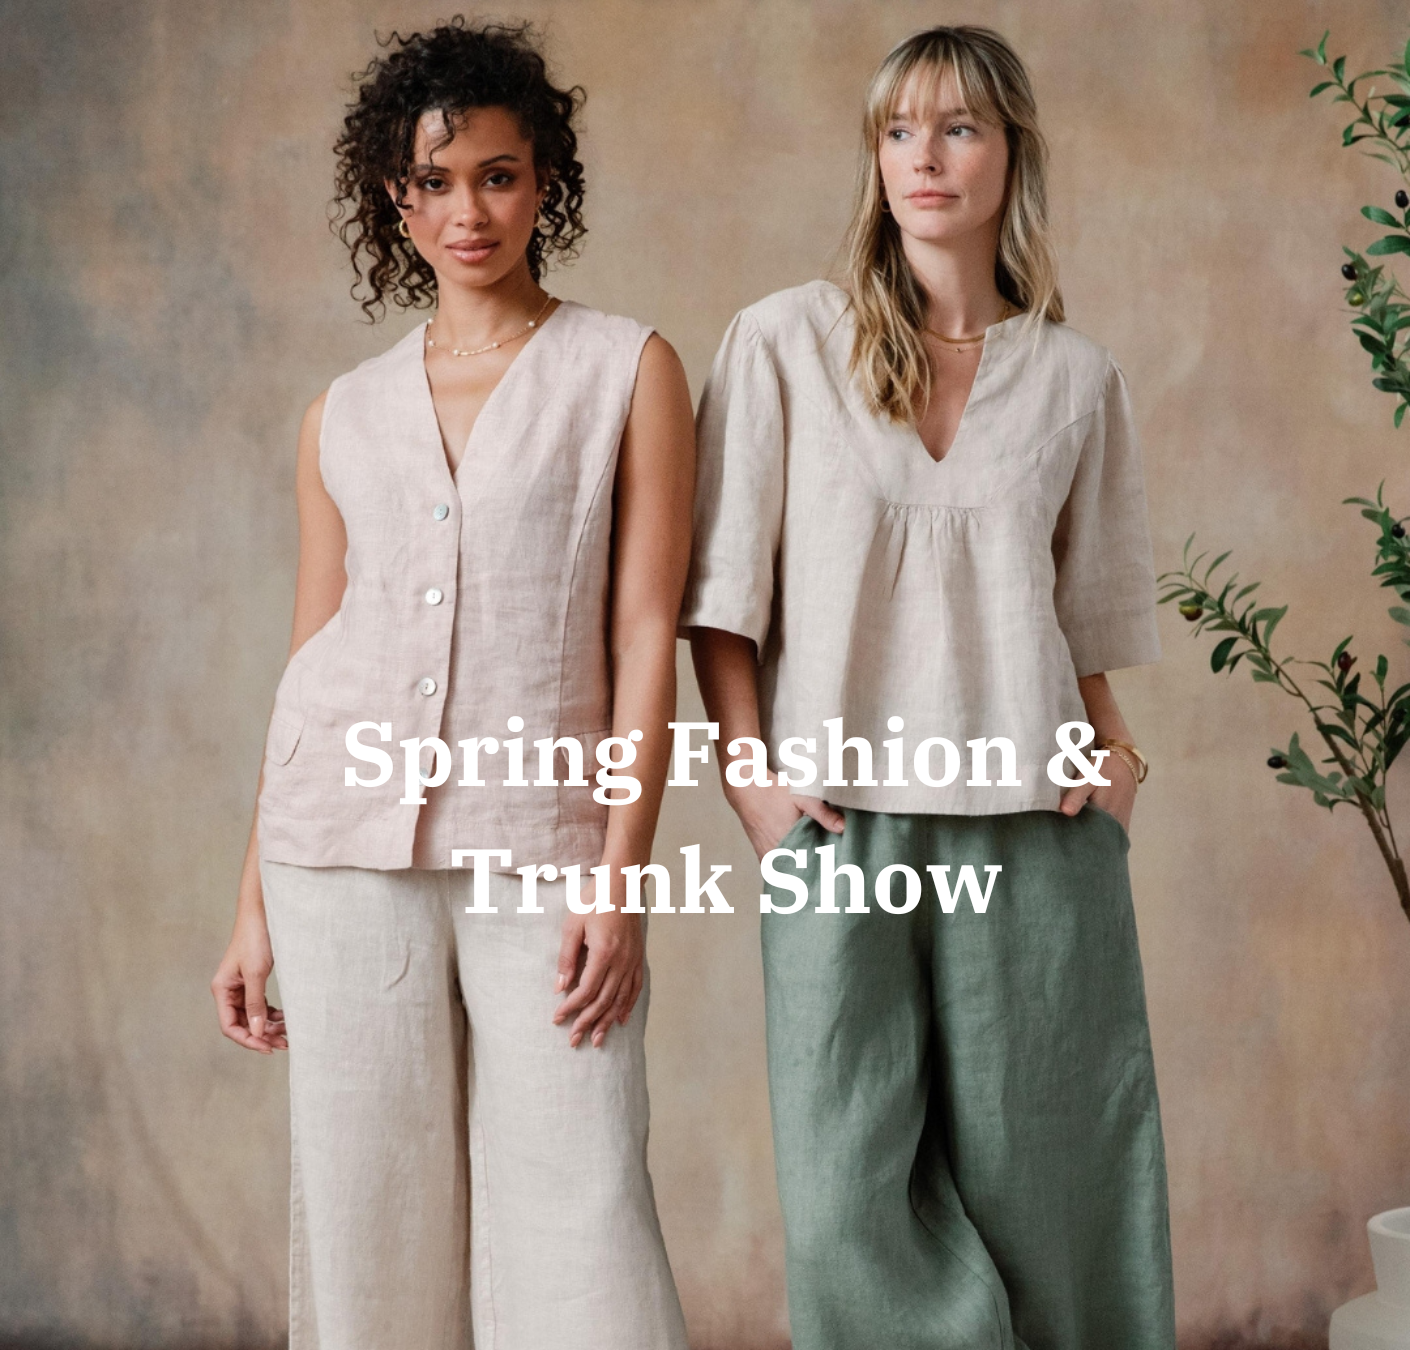 Spring Trunk & Fashion Show Reservation